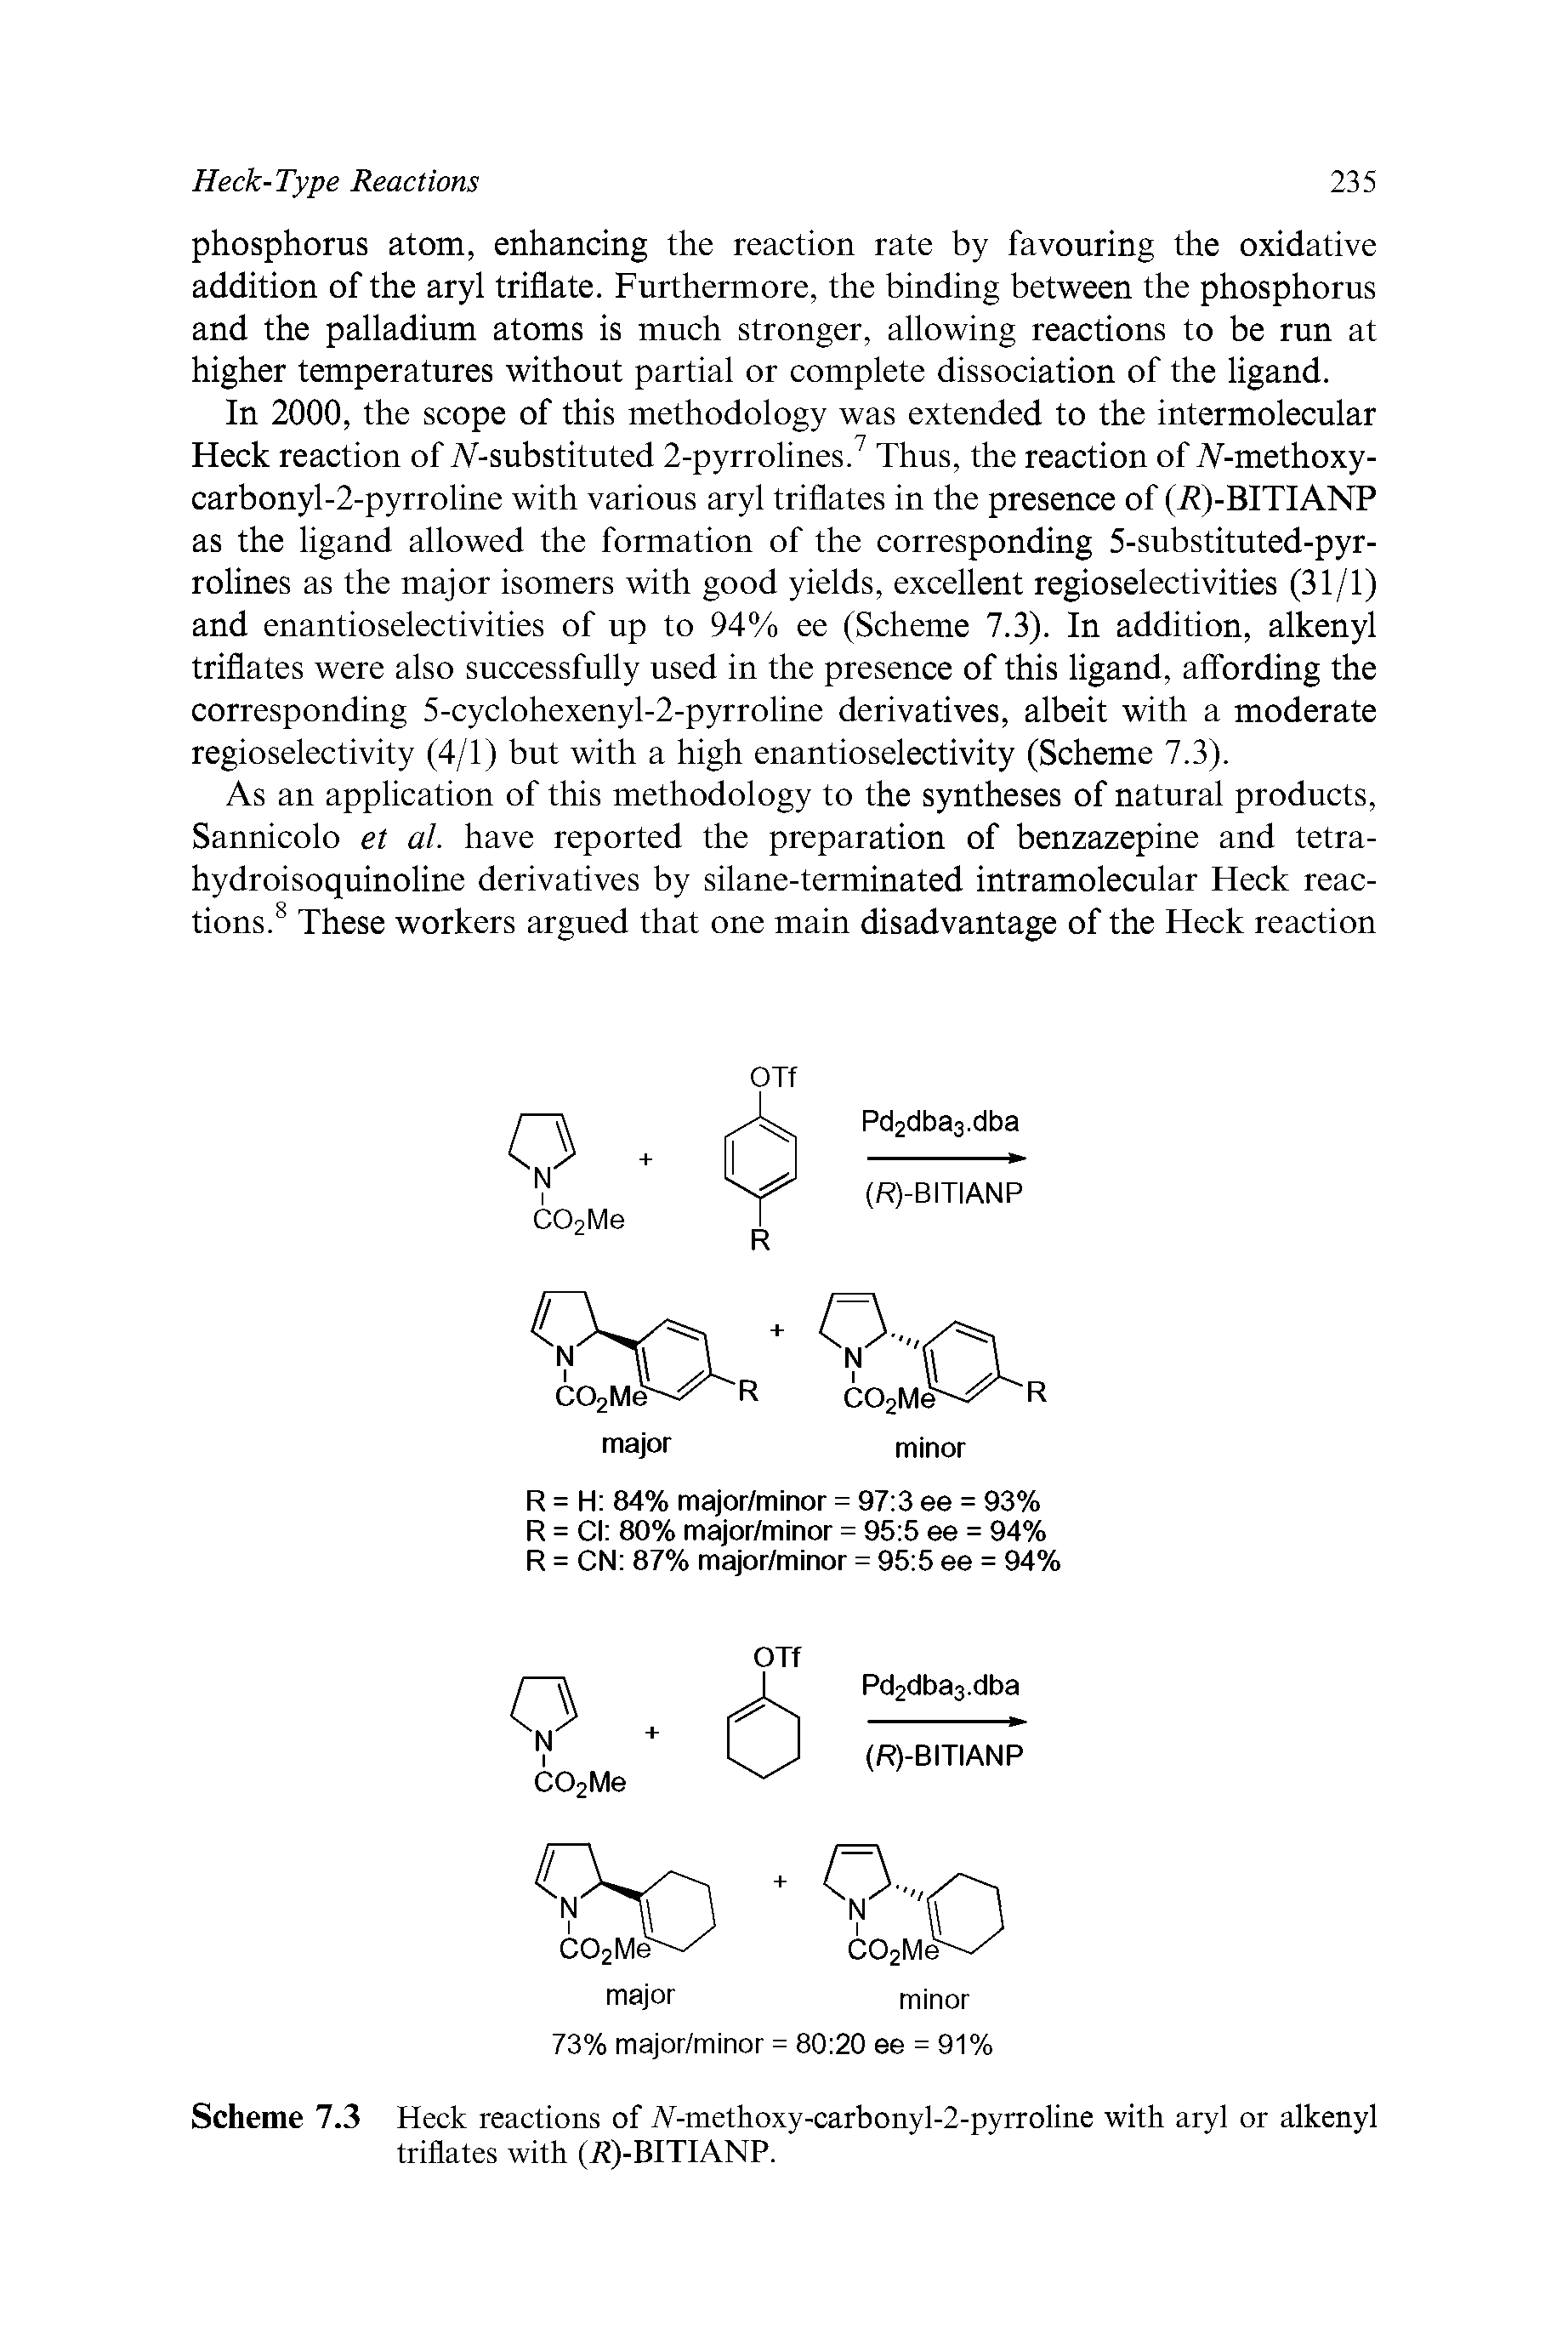 Scheme 7.3 Heck reactions of Af-methoxy-carbonyl-2-pyrroline with aryl or alkenyl triflates with (it)-BITIANP.